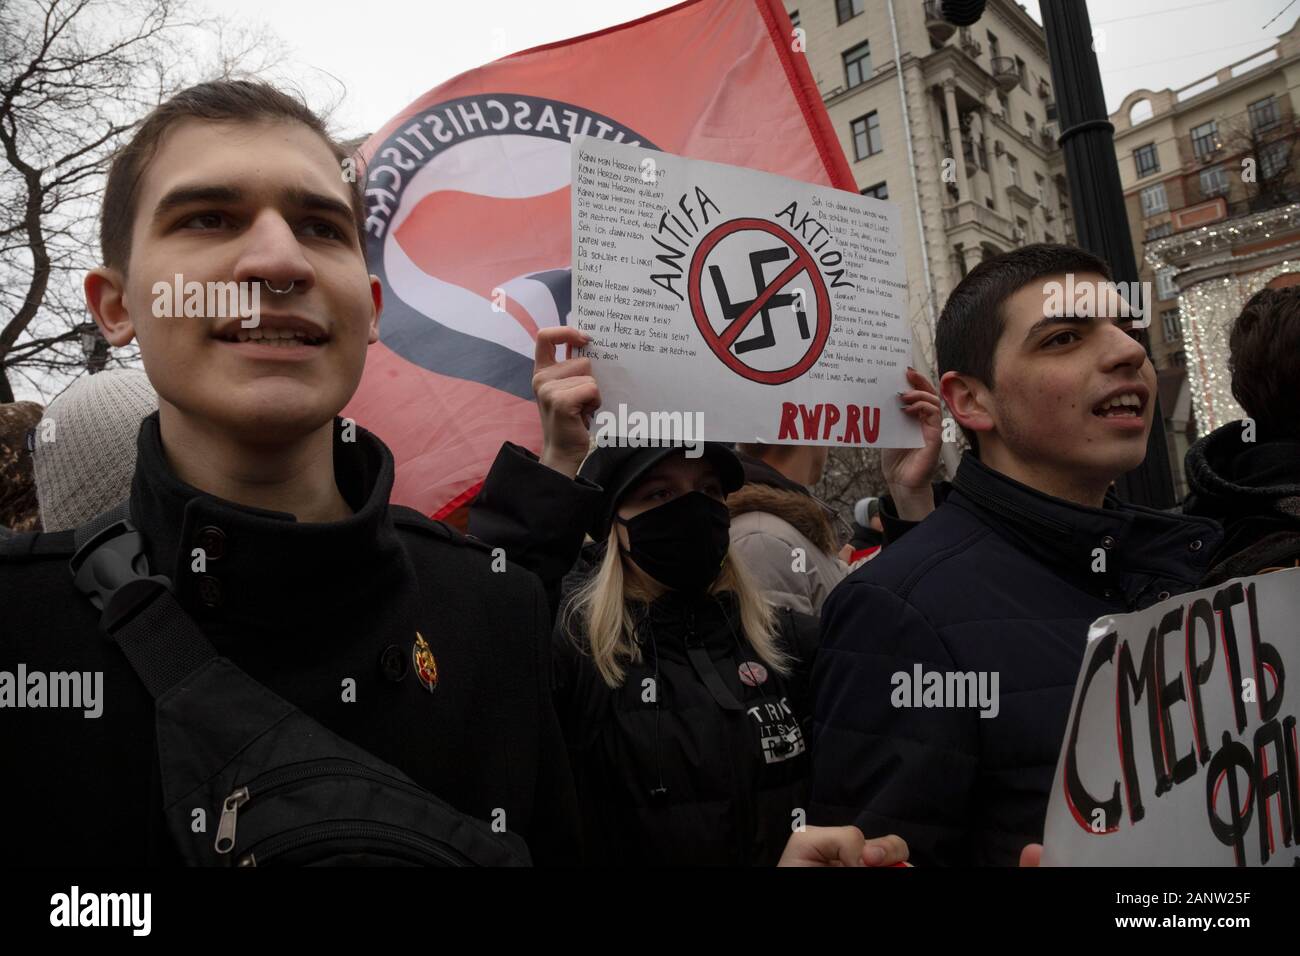 Moscow, Russia. 19th of January, 2020 People take part in a march in memory of lawyer Stanislav Markelov and journalist Anastasia Baburova in Tverskoy Boulevard in central Moscow, Russia Stock Photo